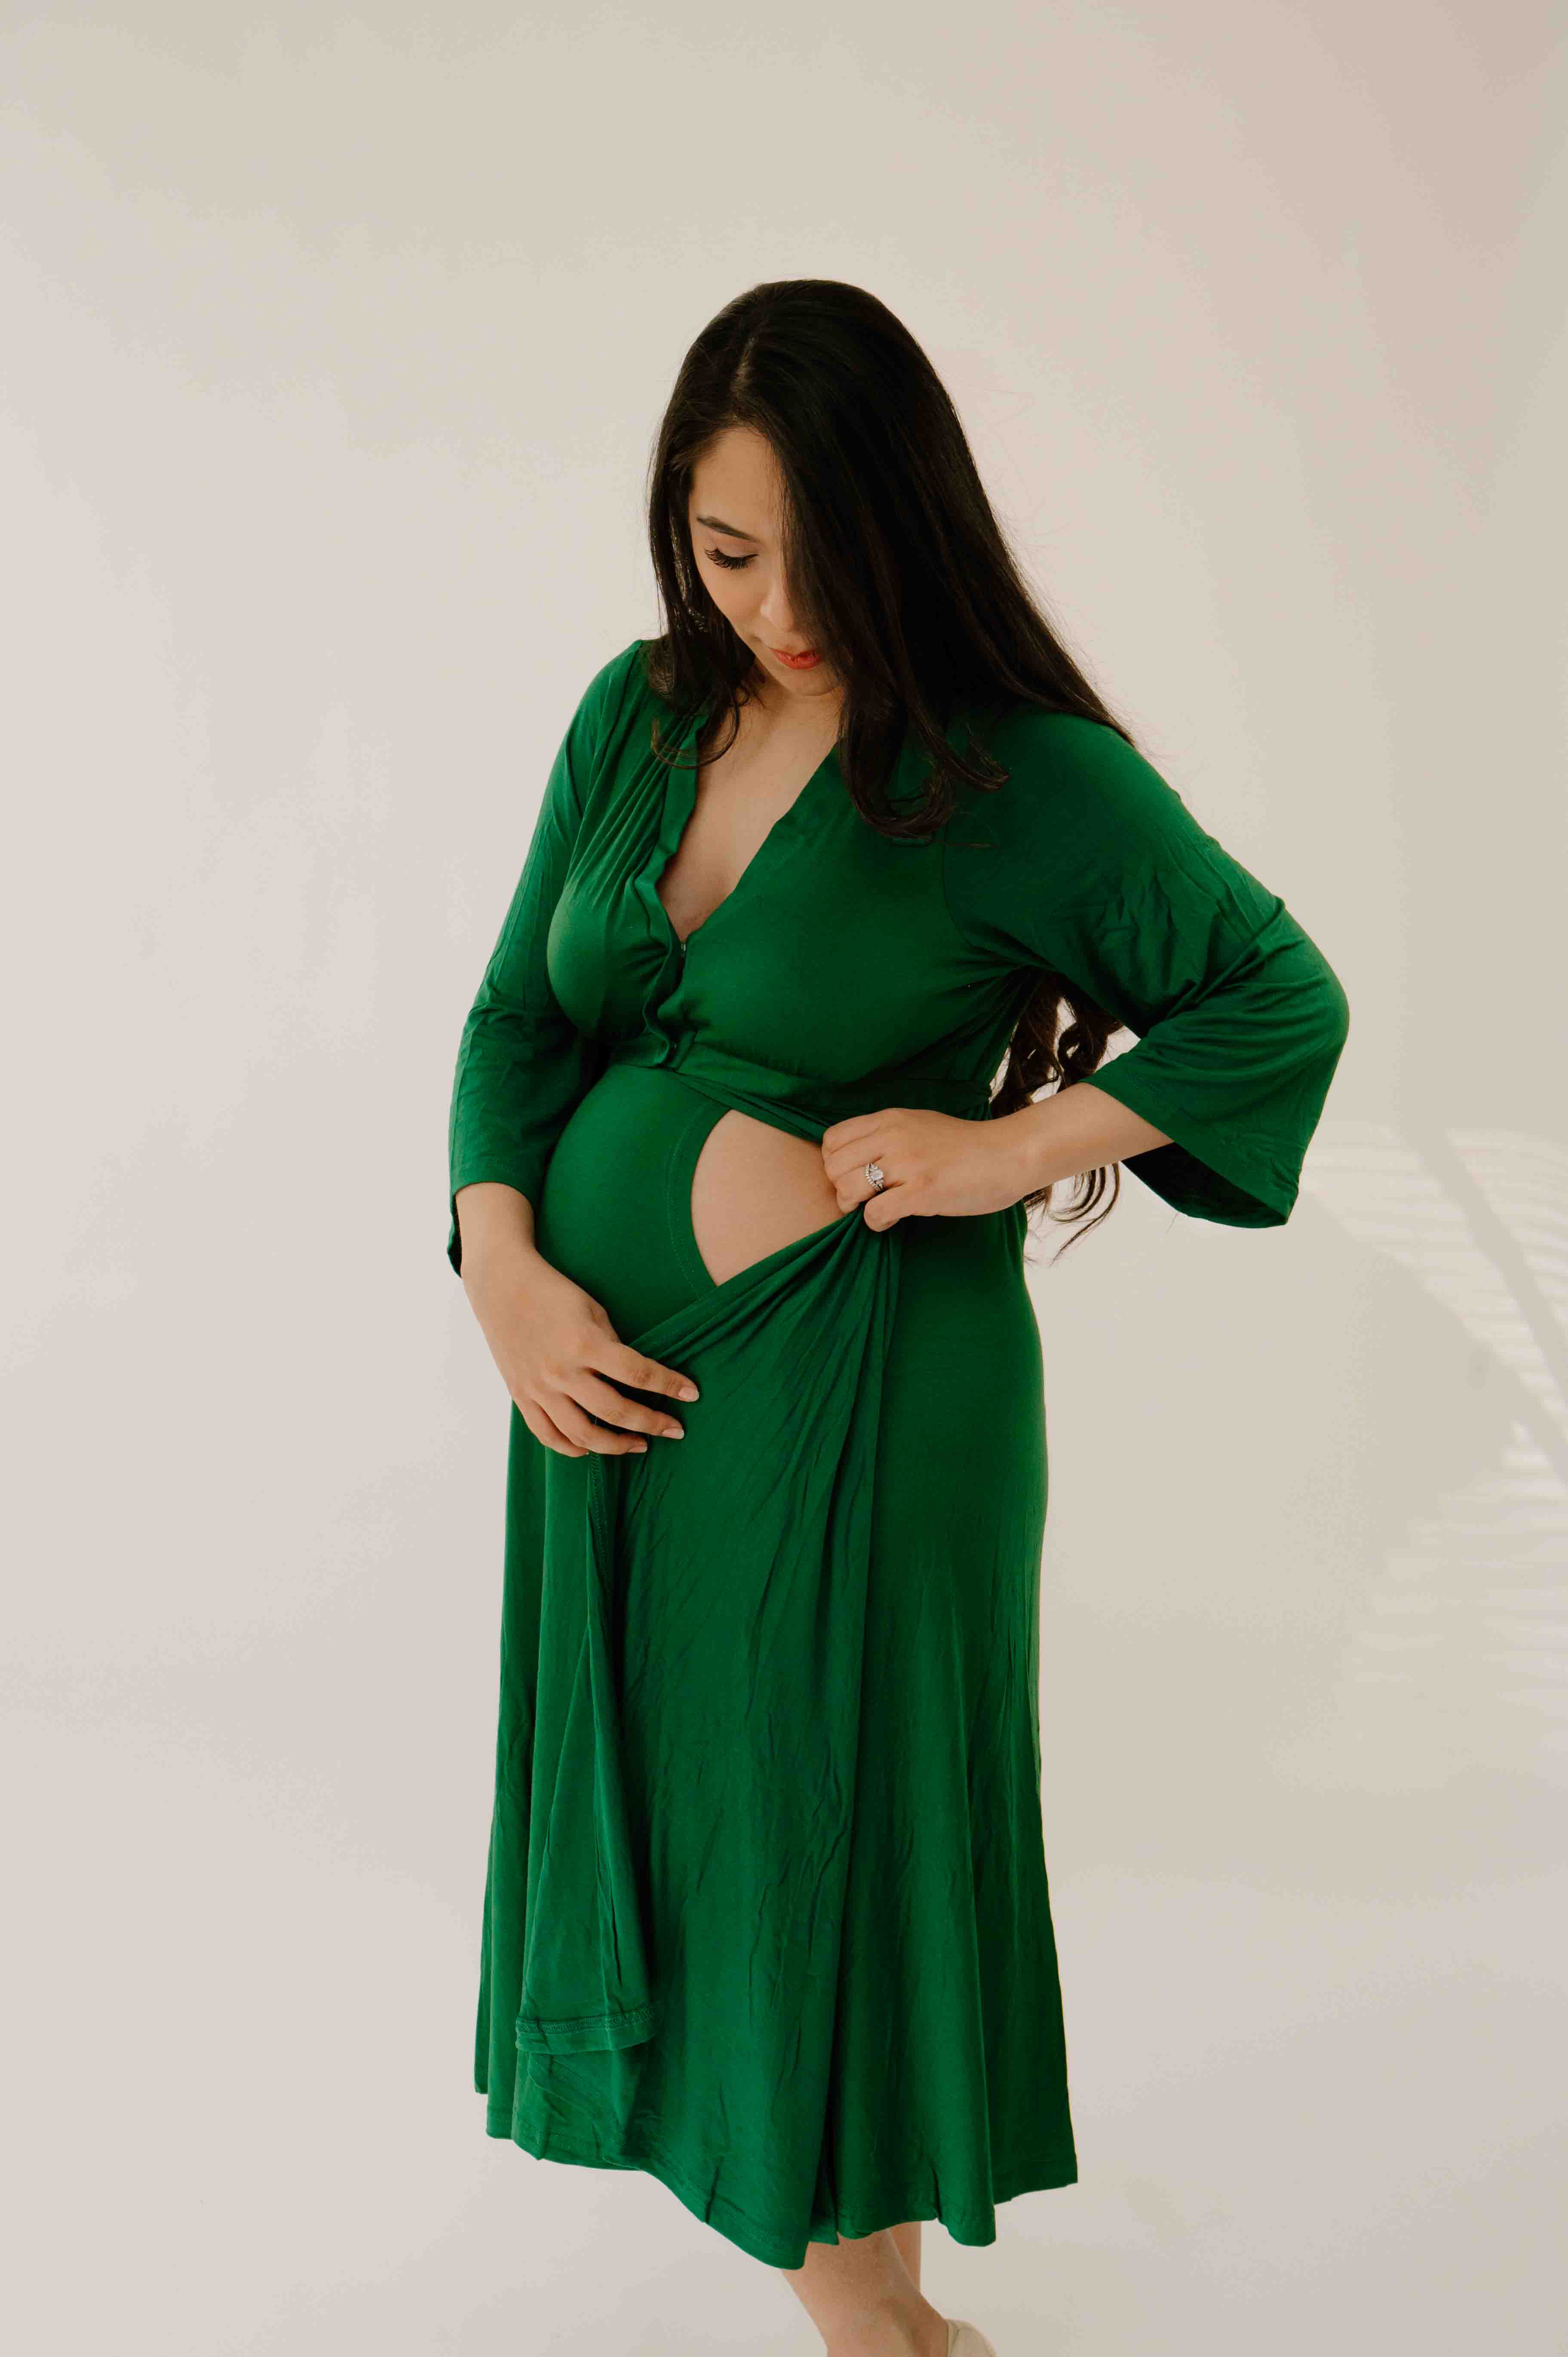 Delivery Gowns - Gowns to Give Birth In